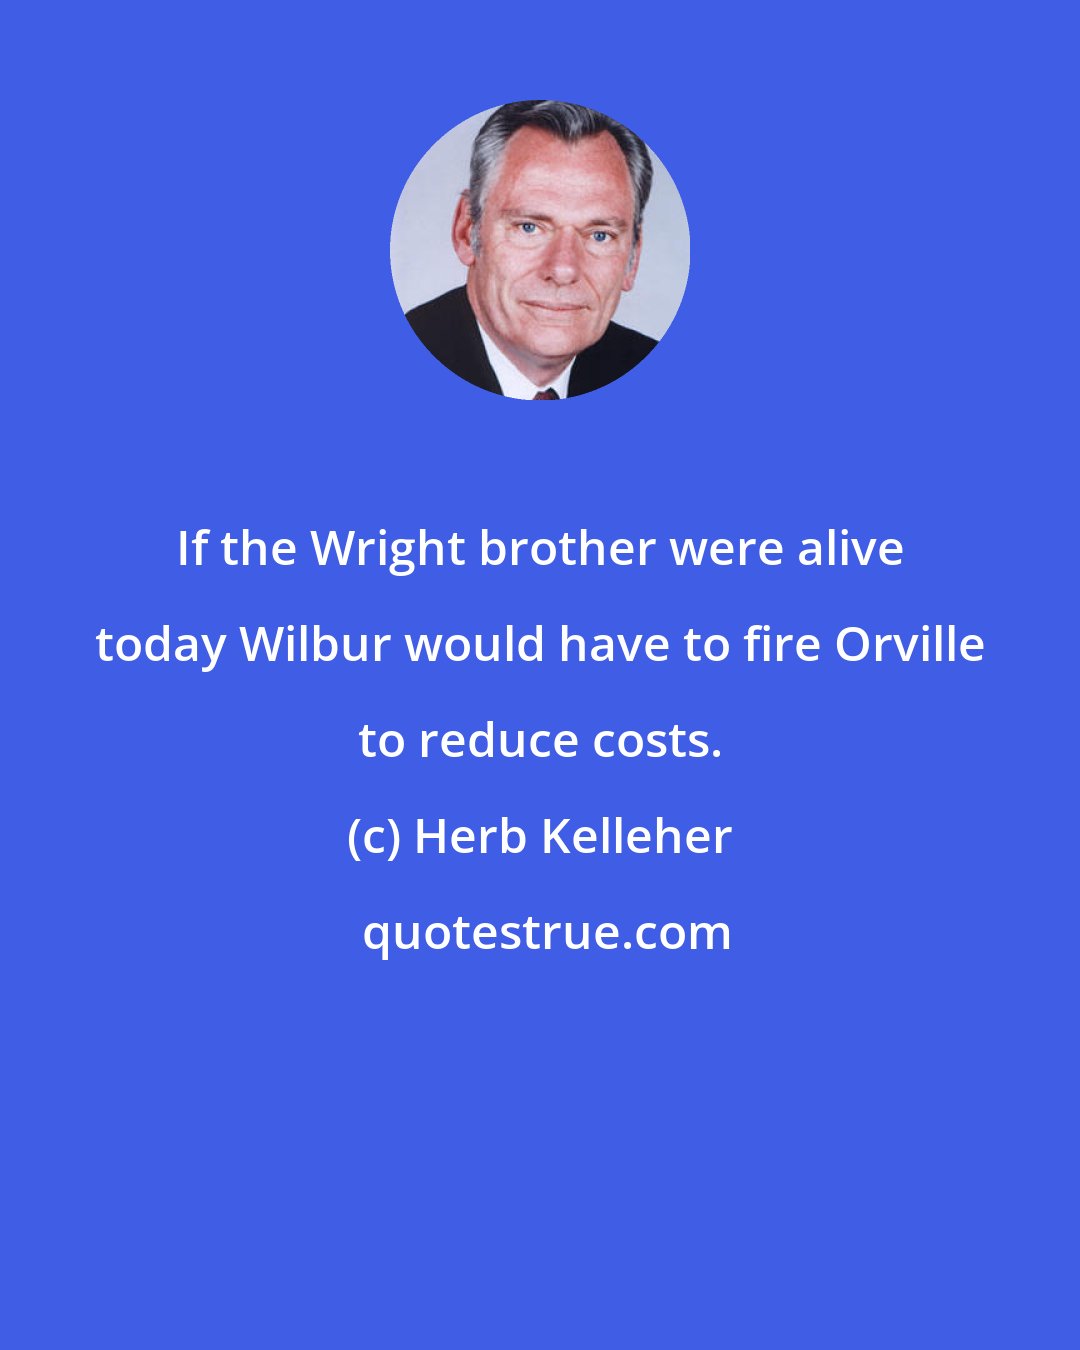 Herb Kelleher: If the Wright brother were alive today Wilbur would have to fire Orville to reduce costs.